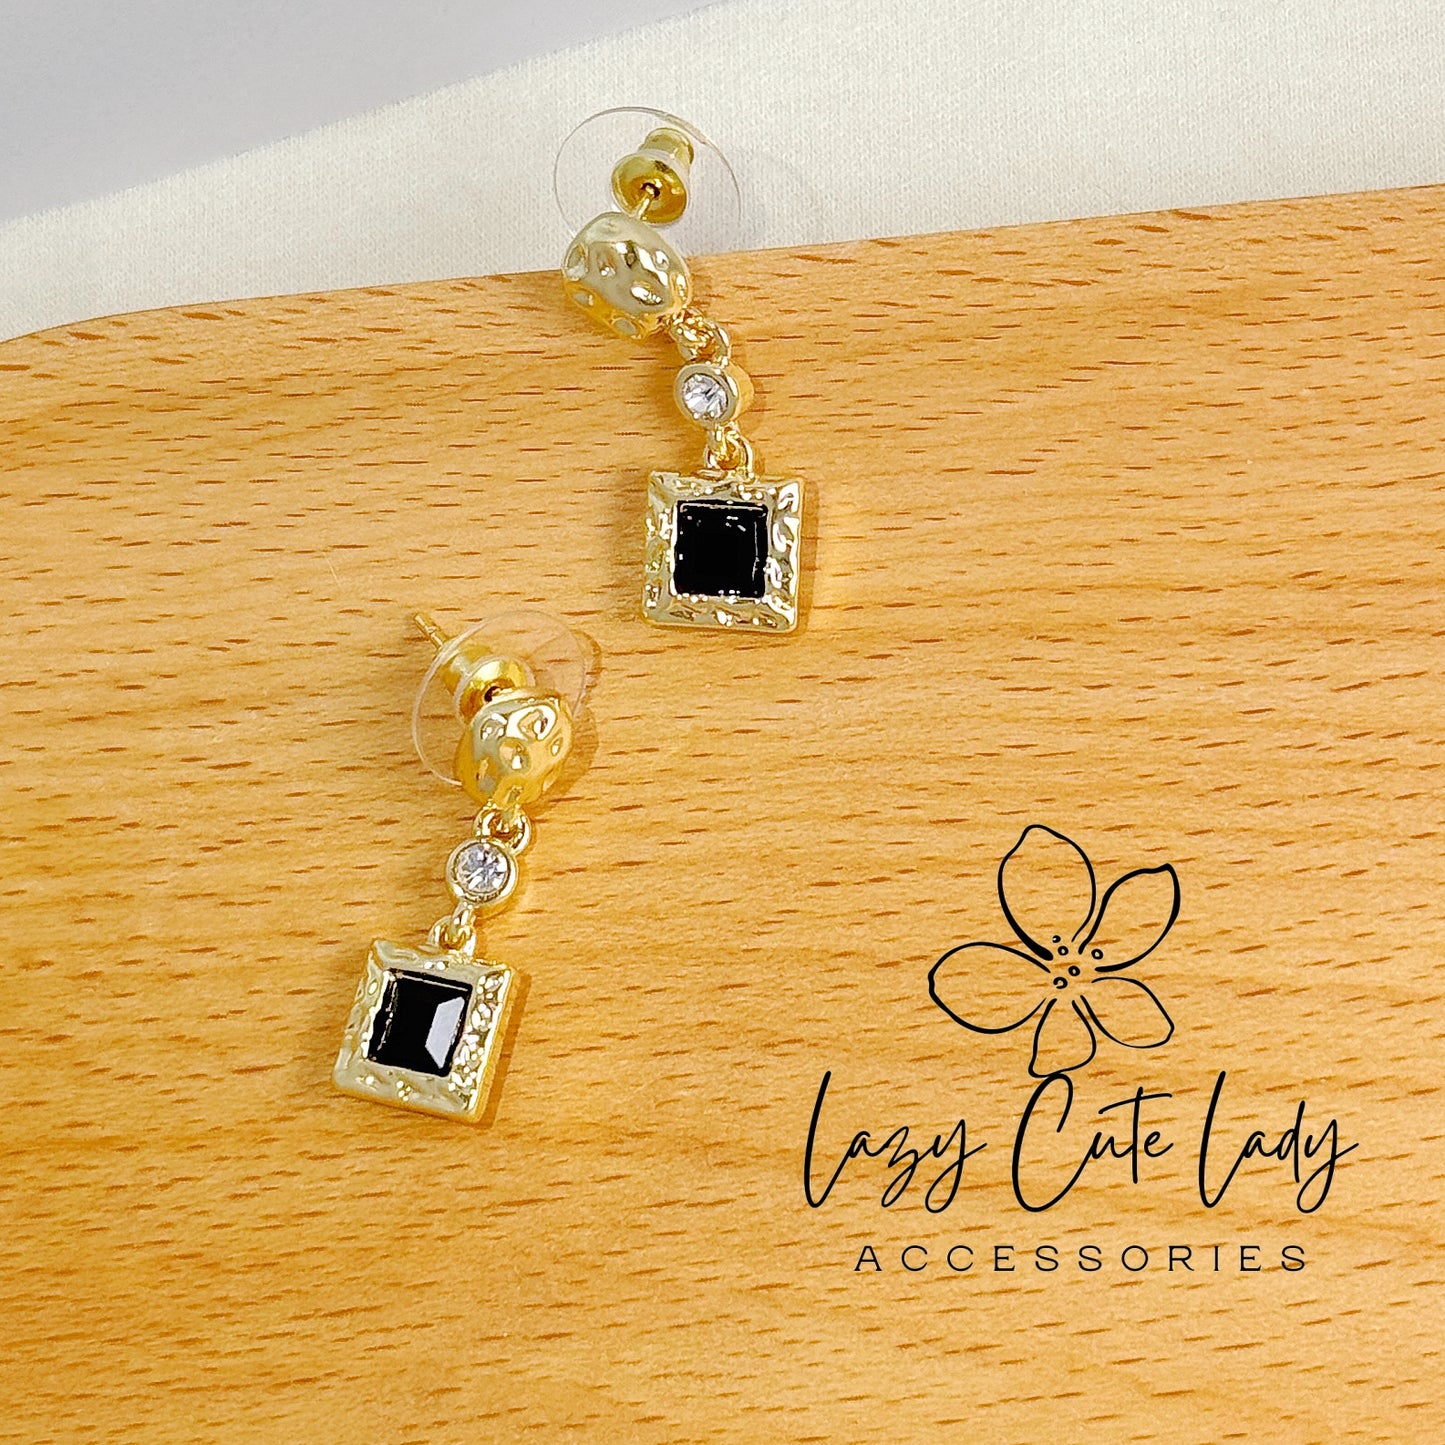 Lazy Cute Lady Accessories-Exquisite Metal Cube and Cubic Zirconia Drop Earring-Drop Earring-Metal allergy-friendly earring-Fashion Earring-Gift-for girl for women